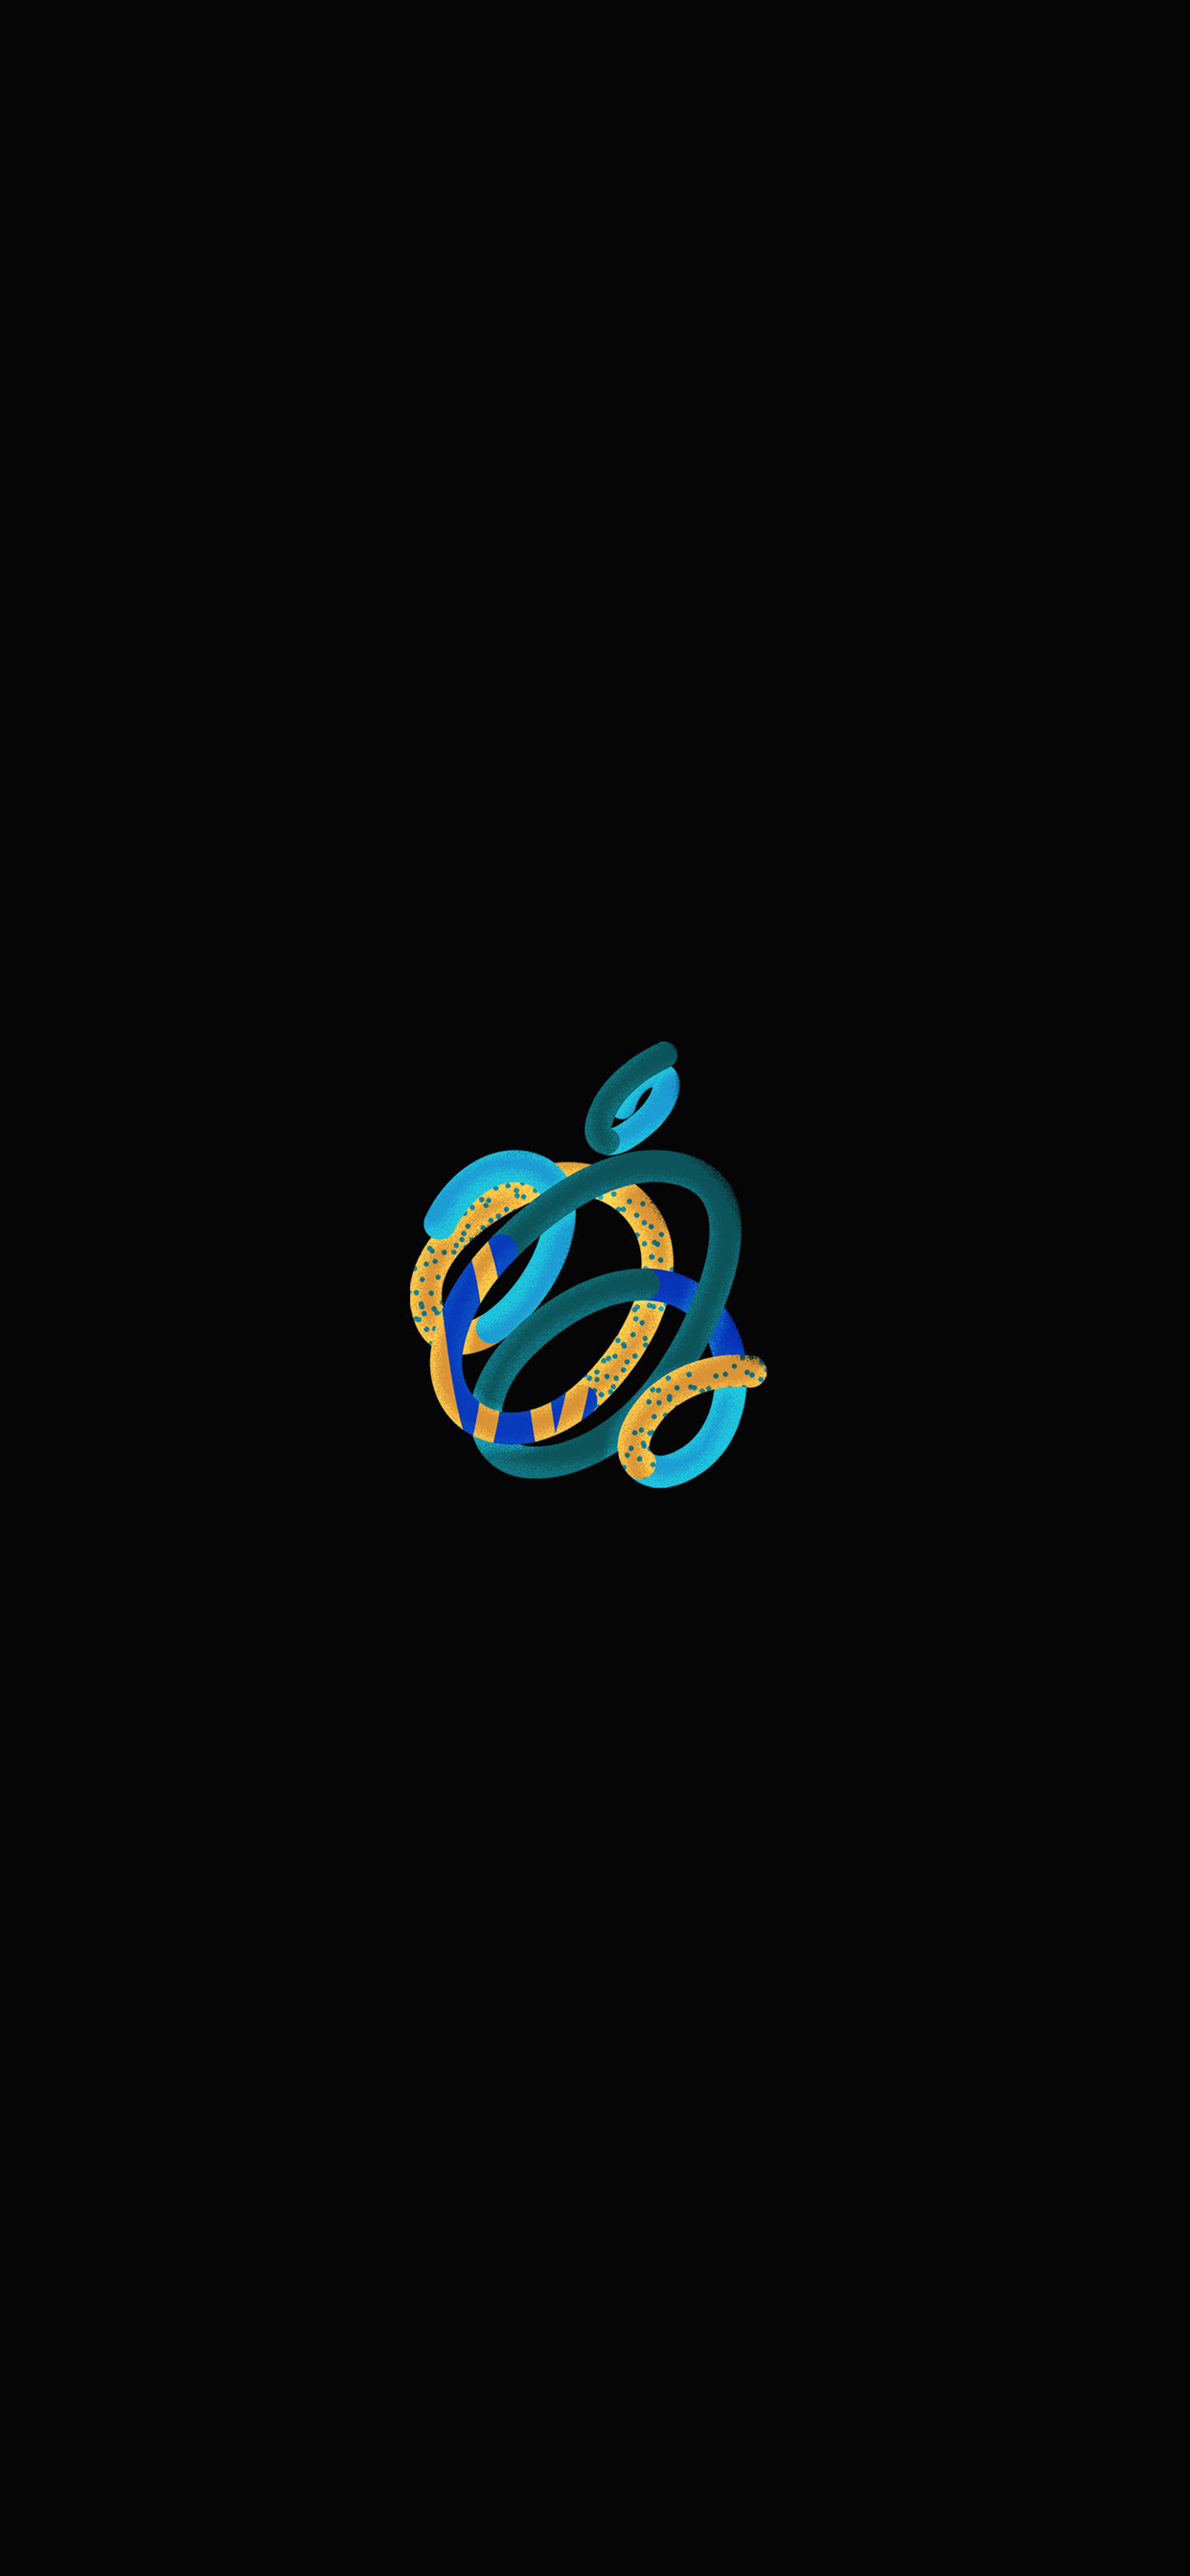 For the contest 'logo design with a snake' - Black glitch